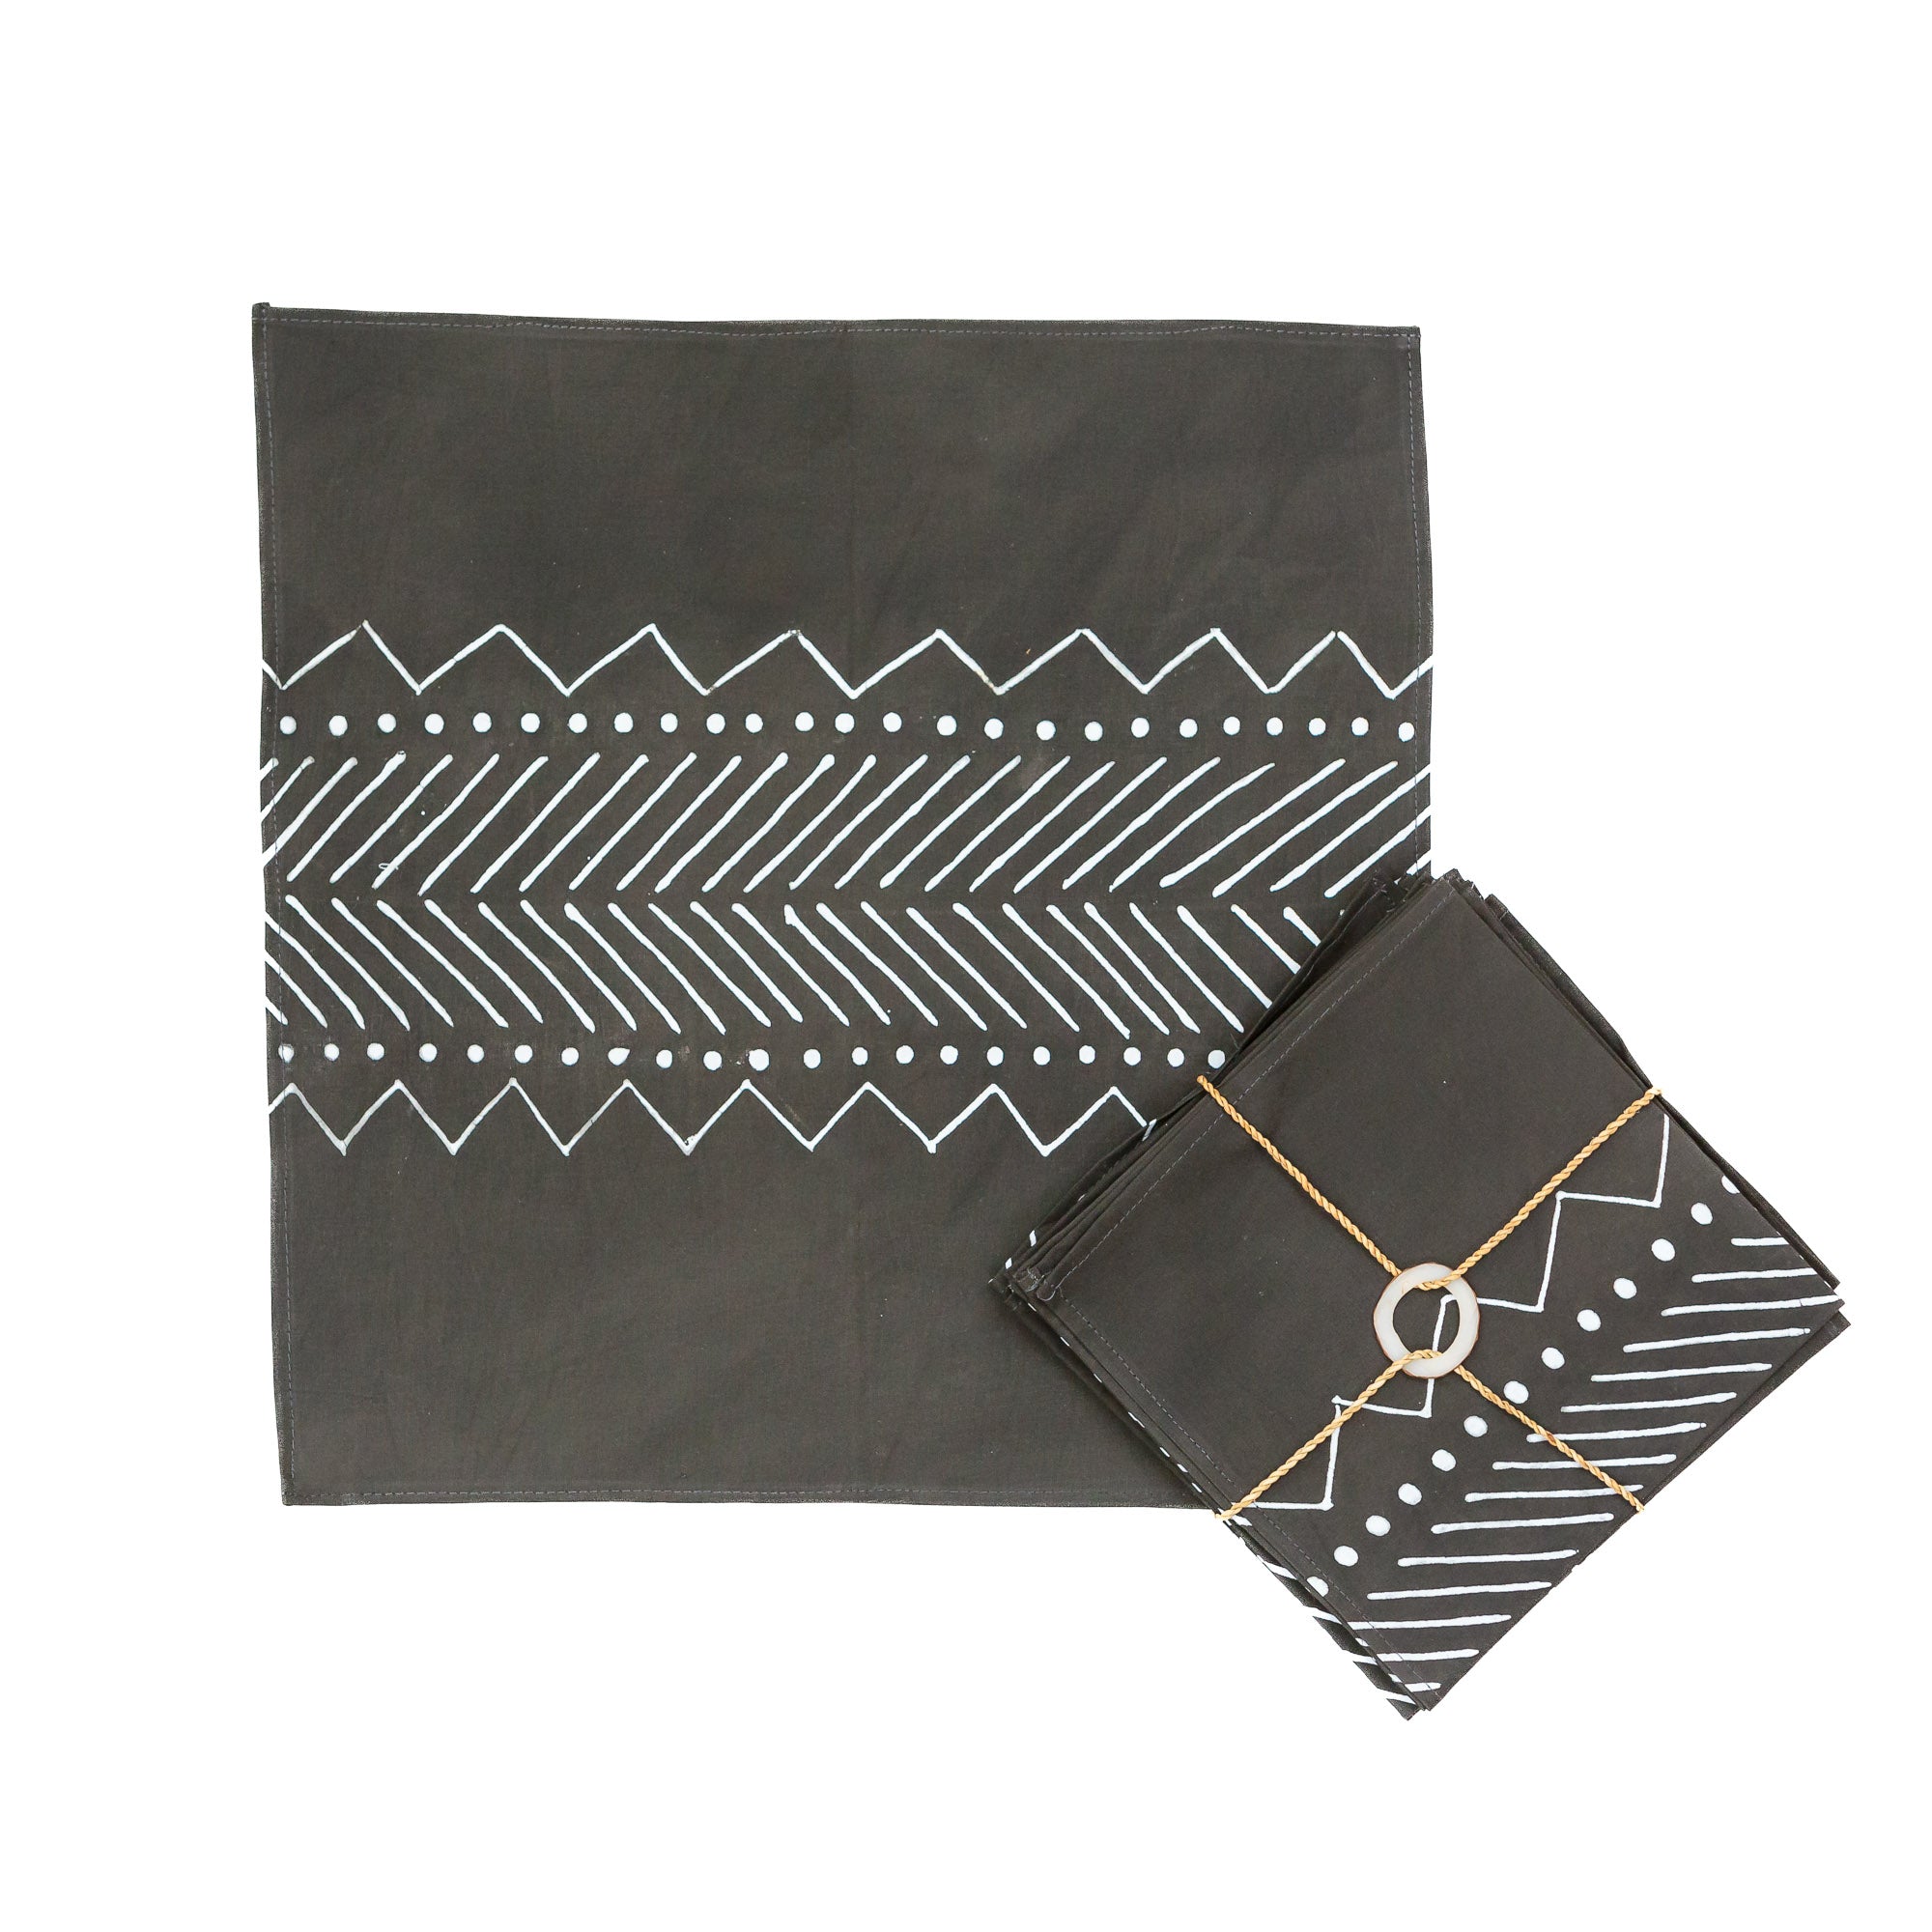 Matika Black Linear Napkin Set - Handmade by TRIBAL TEXTILES - Handcrafted Home Decor Interiors - African Made